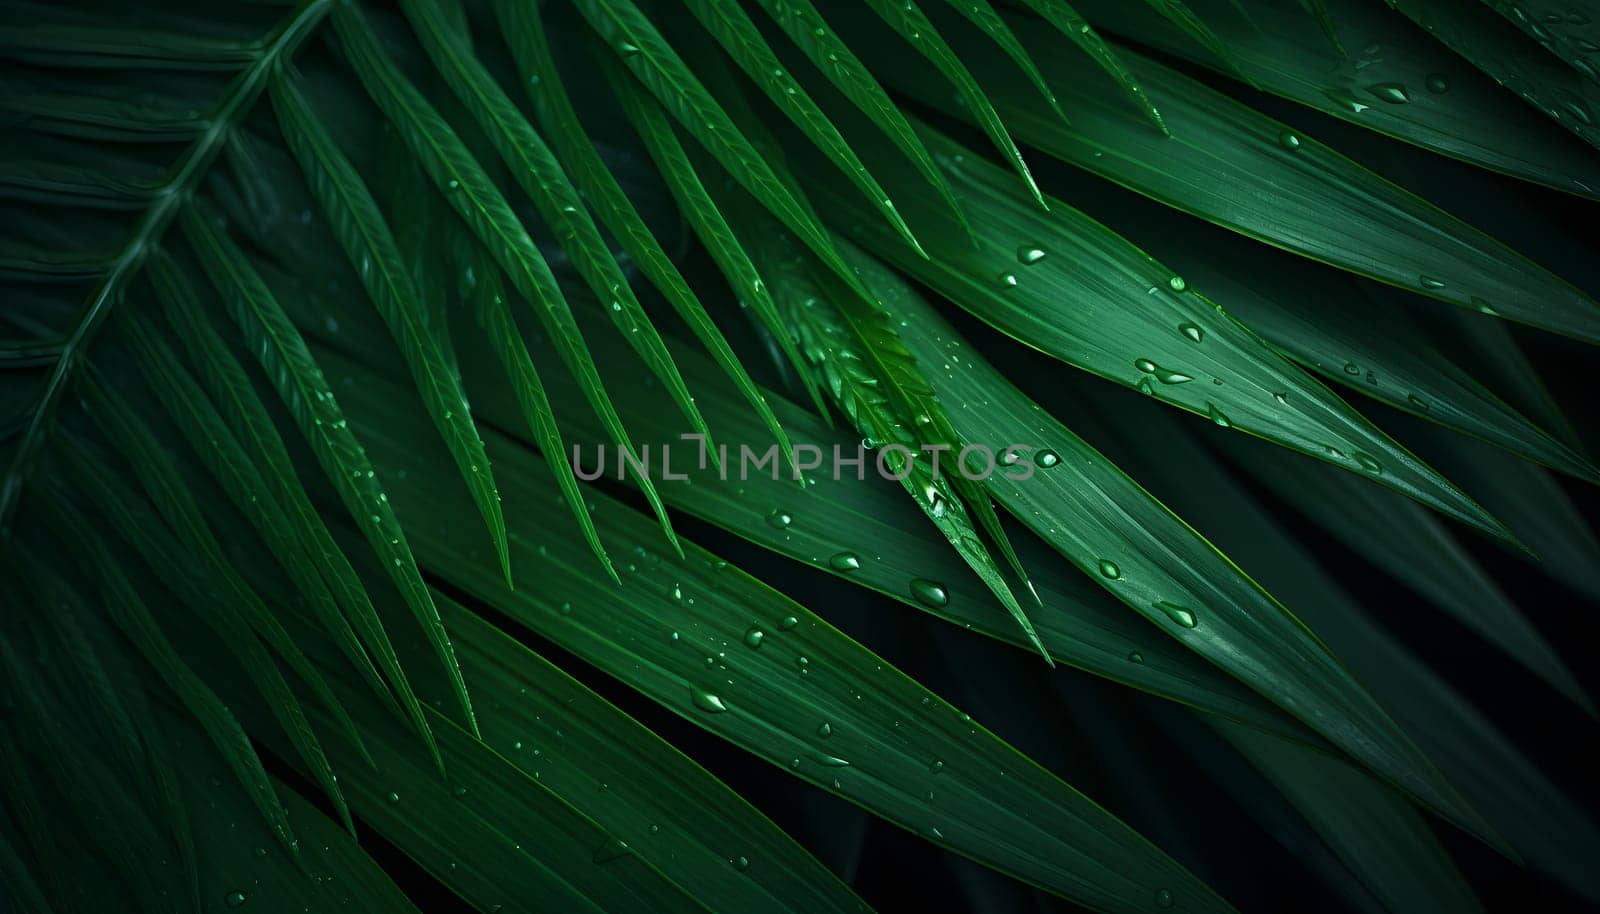 A close-up view capturing the serene beauty of a vibrant green leaf, enhanced by glistening water droplets scattered across its surface.